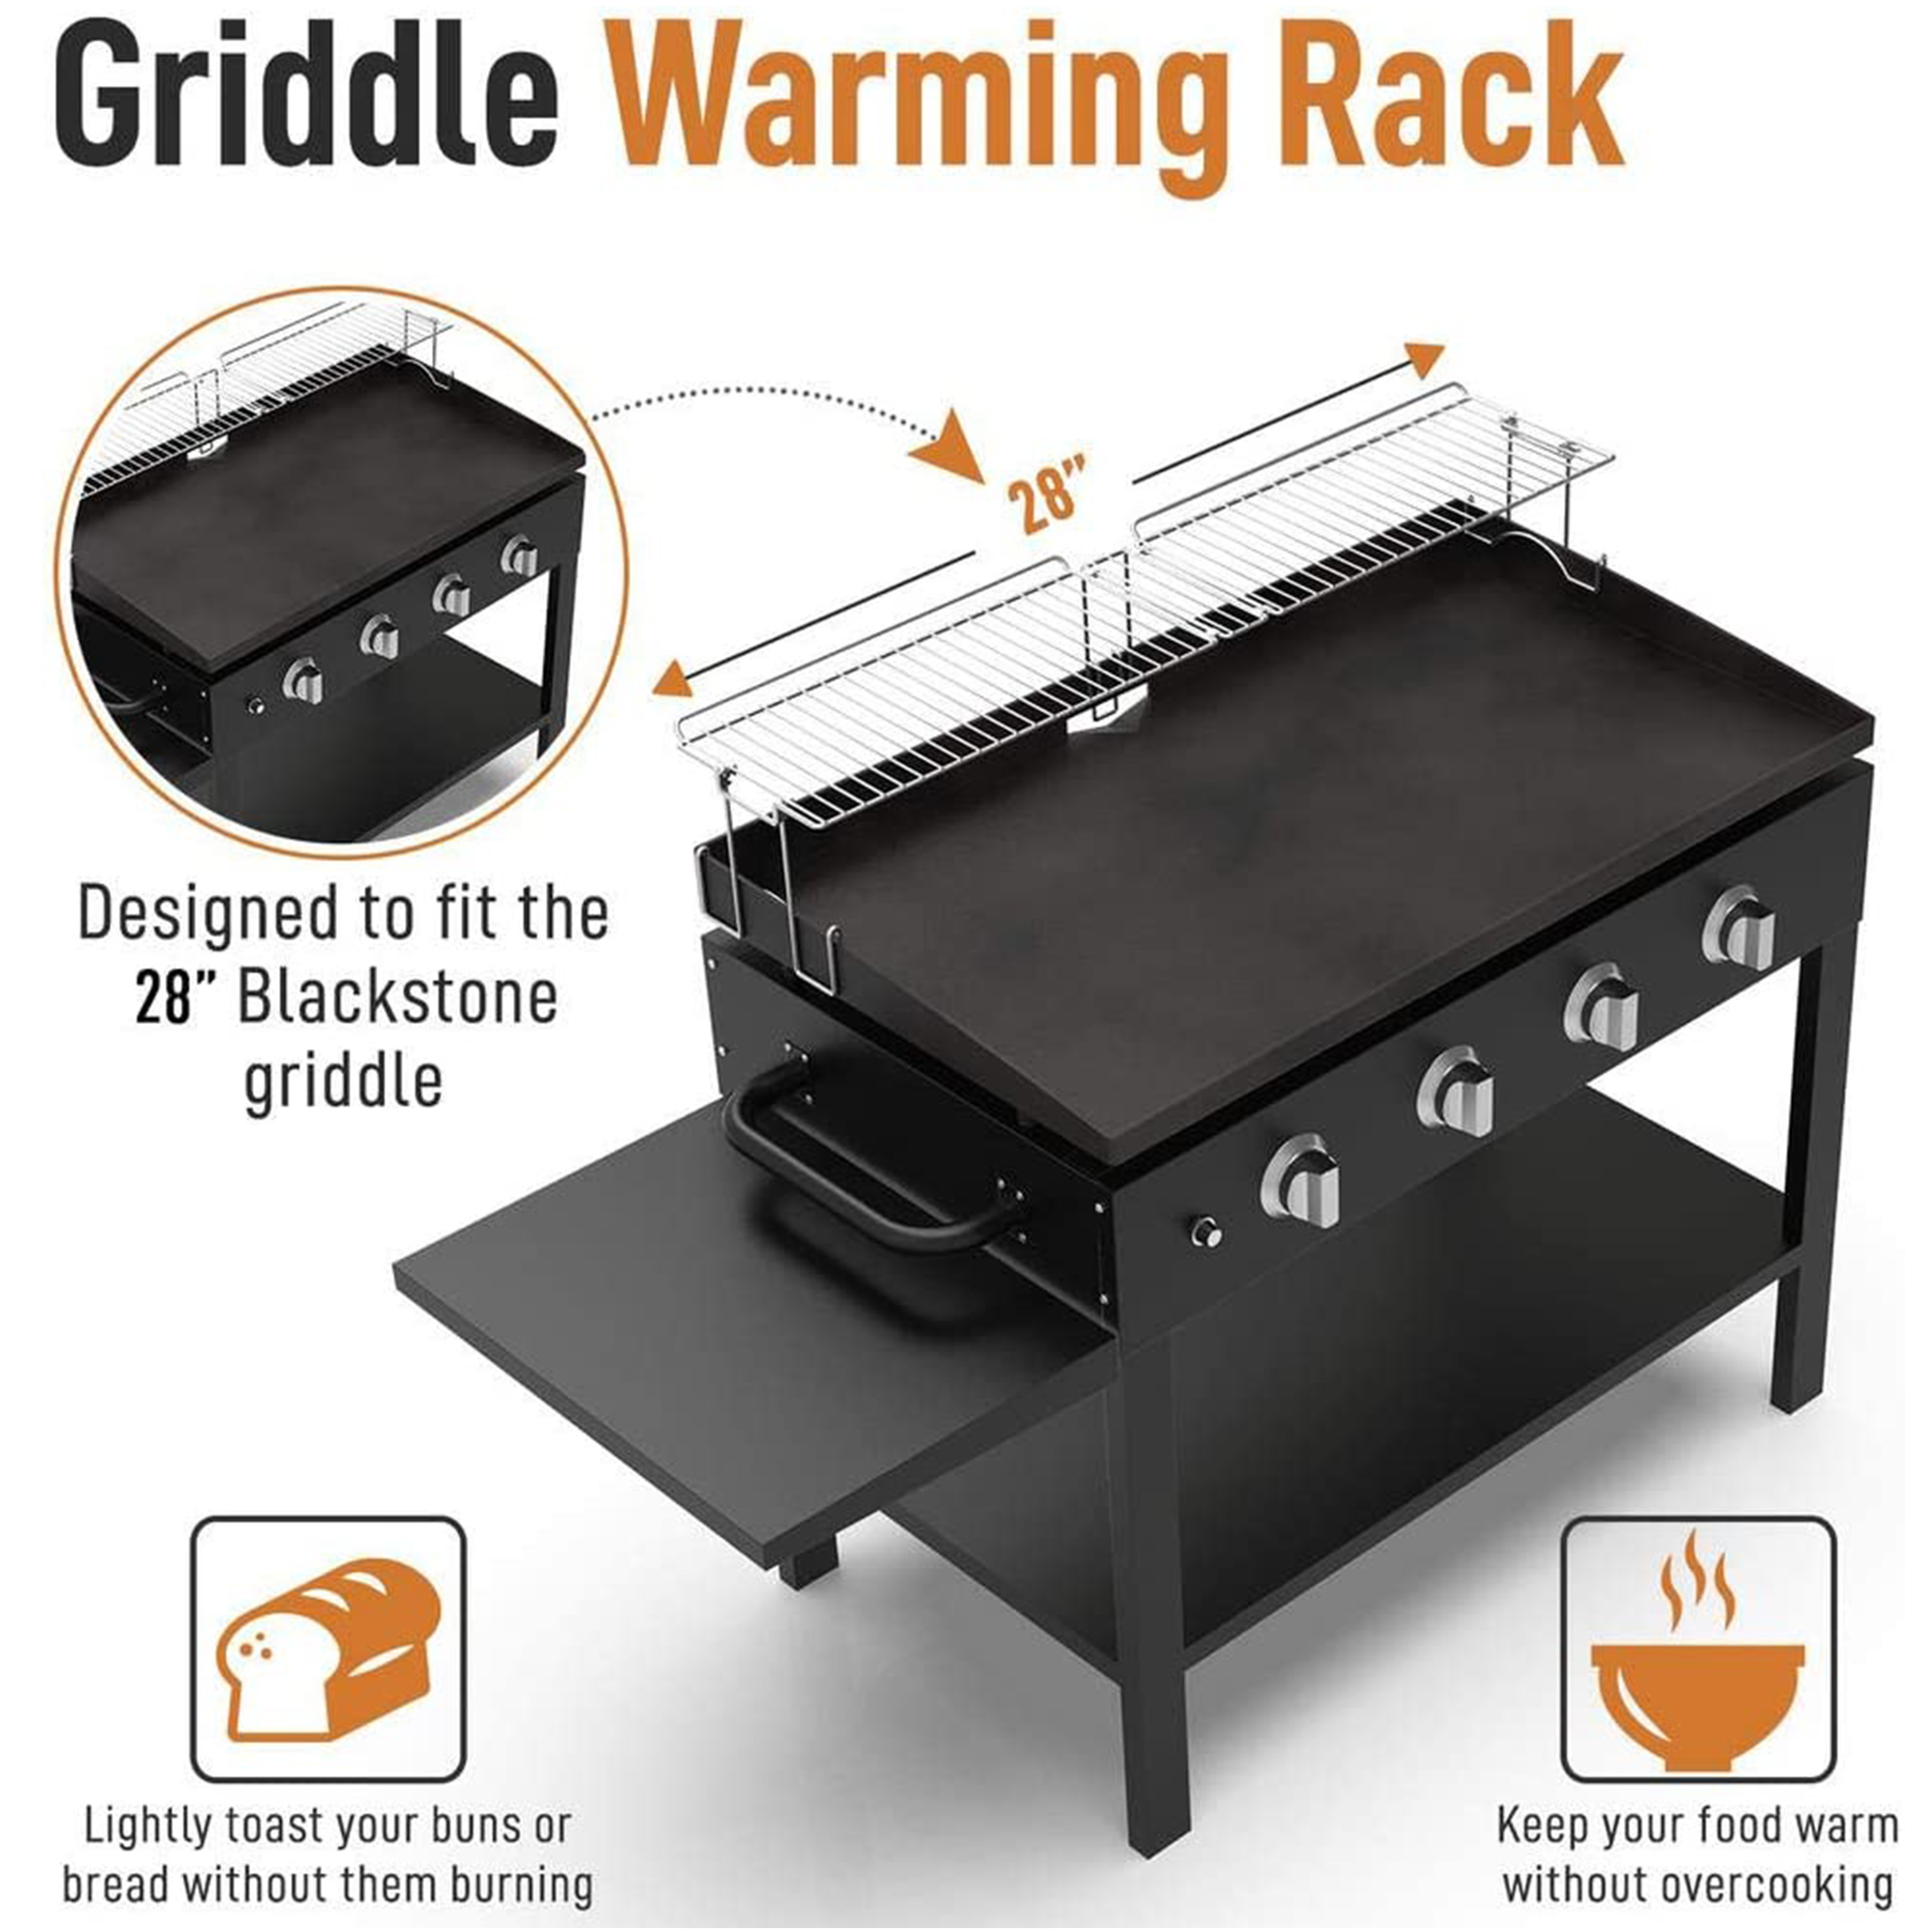 Yukon Glory Stainless Steel Griddle Warming Rack Designed for 28” Blackstone  Griddles